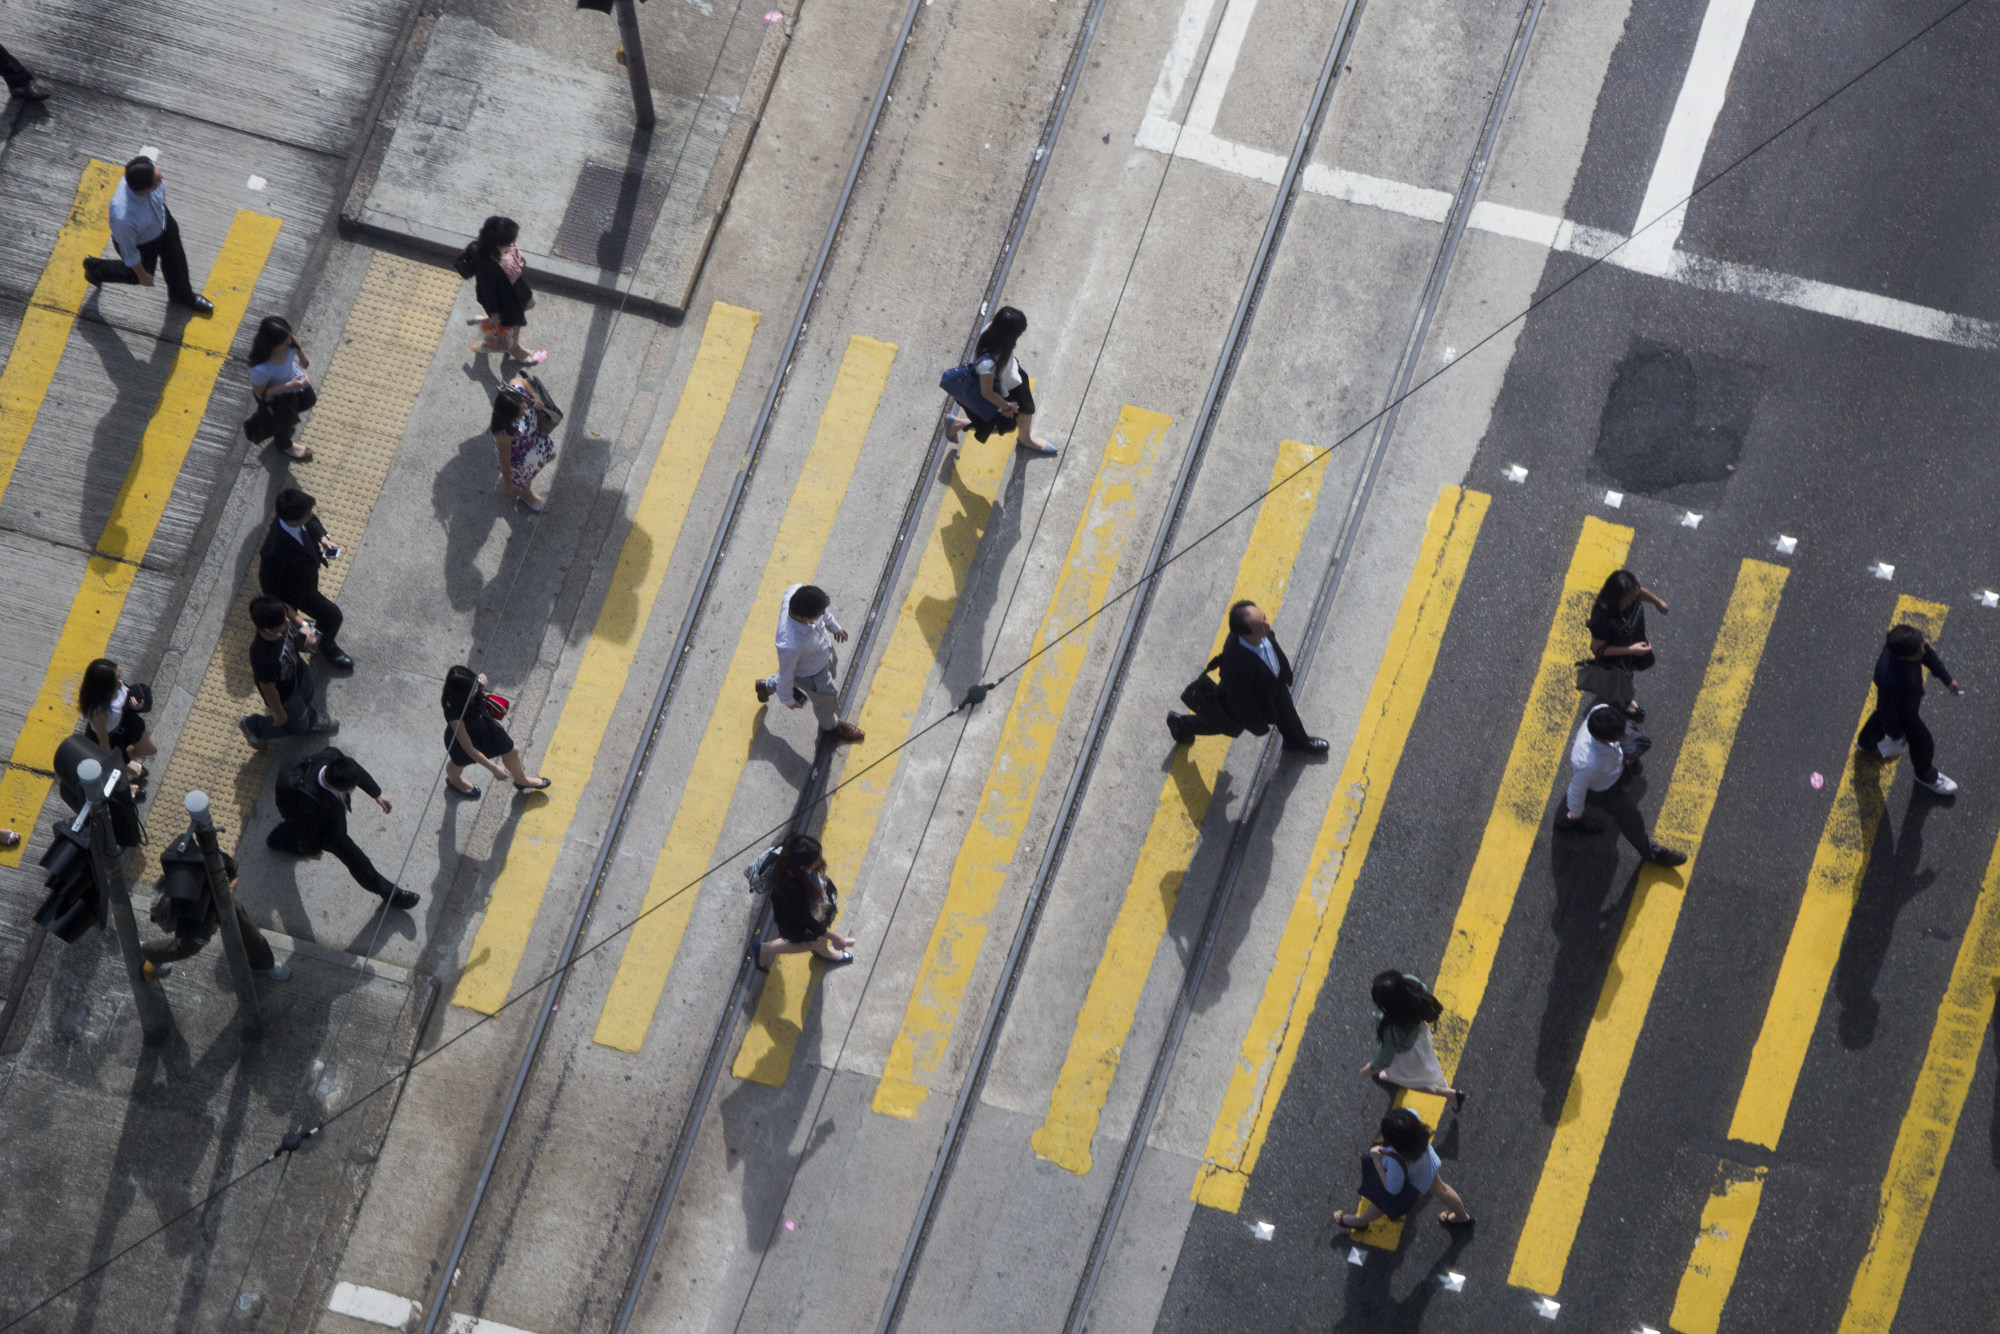 Divisions in society could undermine Hong Kong's growth and even lead to instability. Photo: Bloomberg